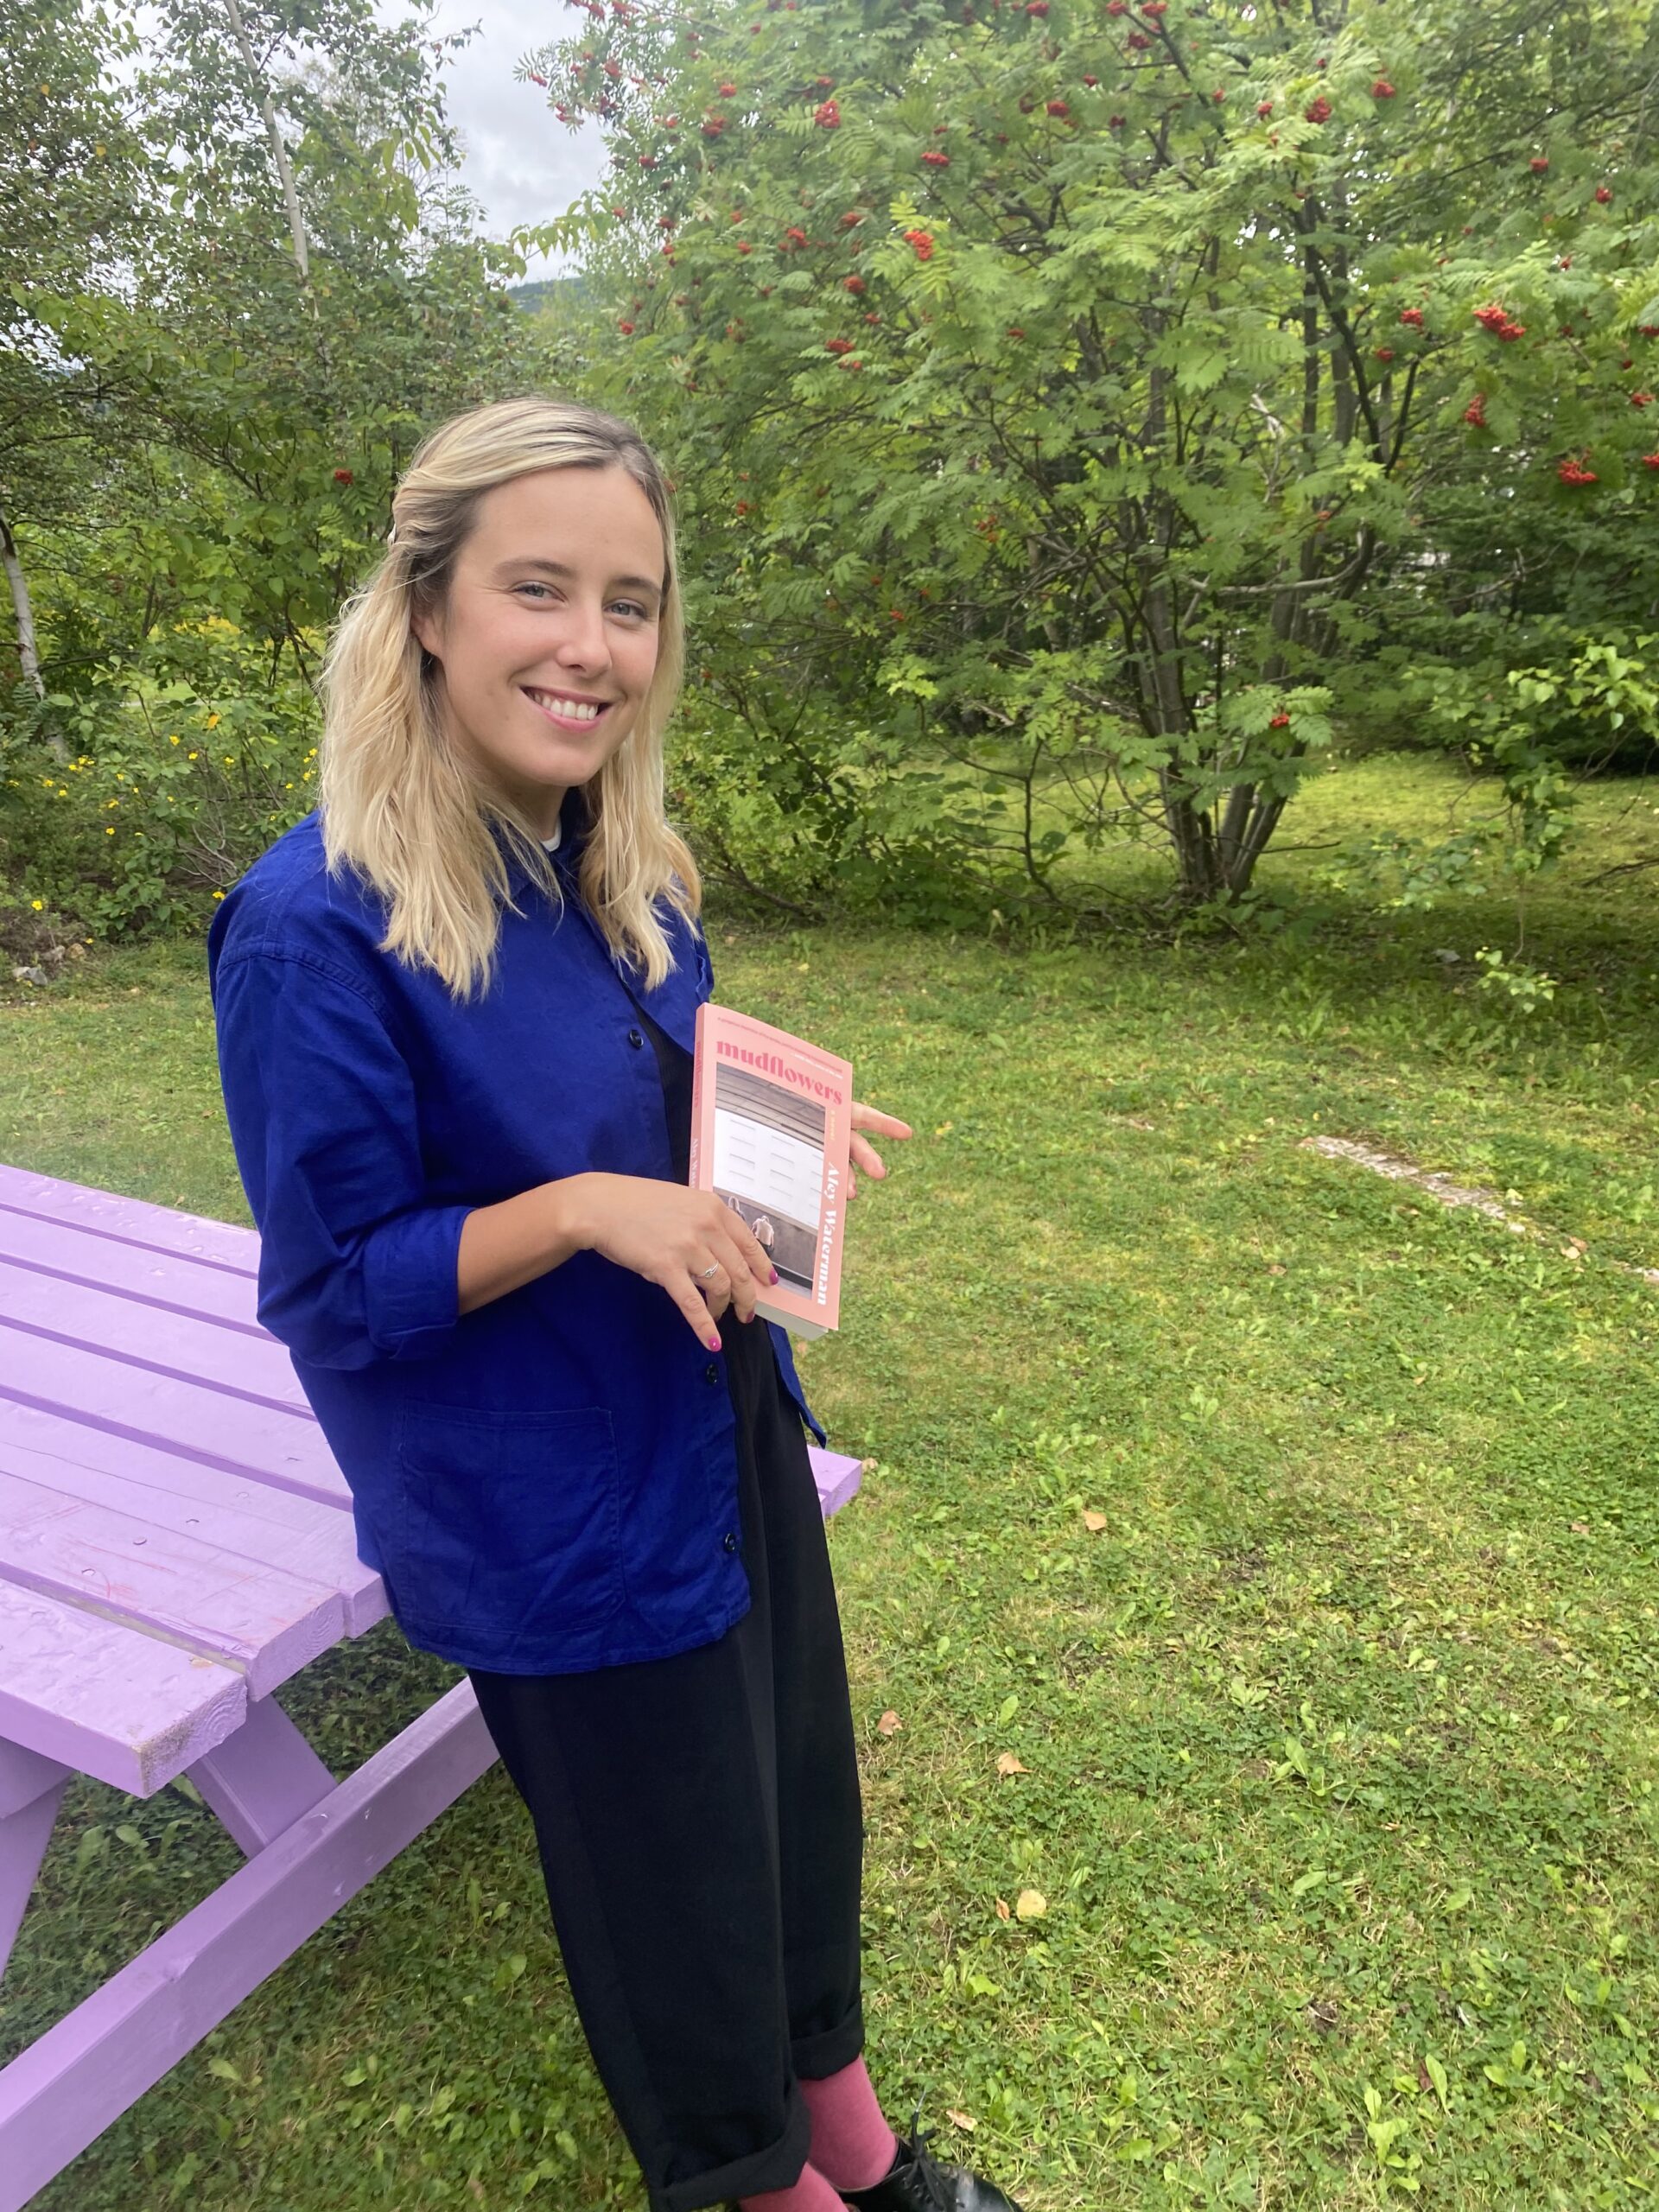 Aley Waterman near the community garden at Grenfell University in Corner Brook, NL where she works.